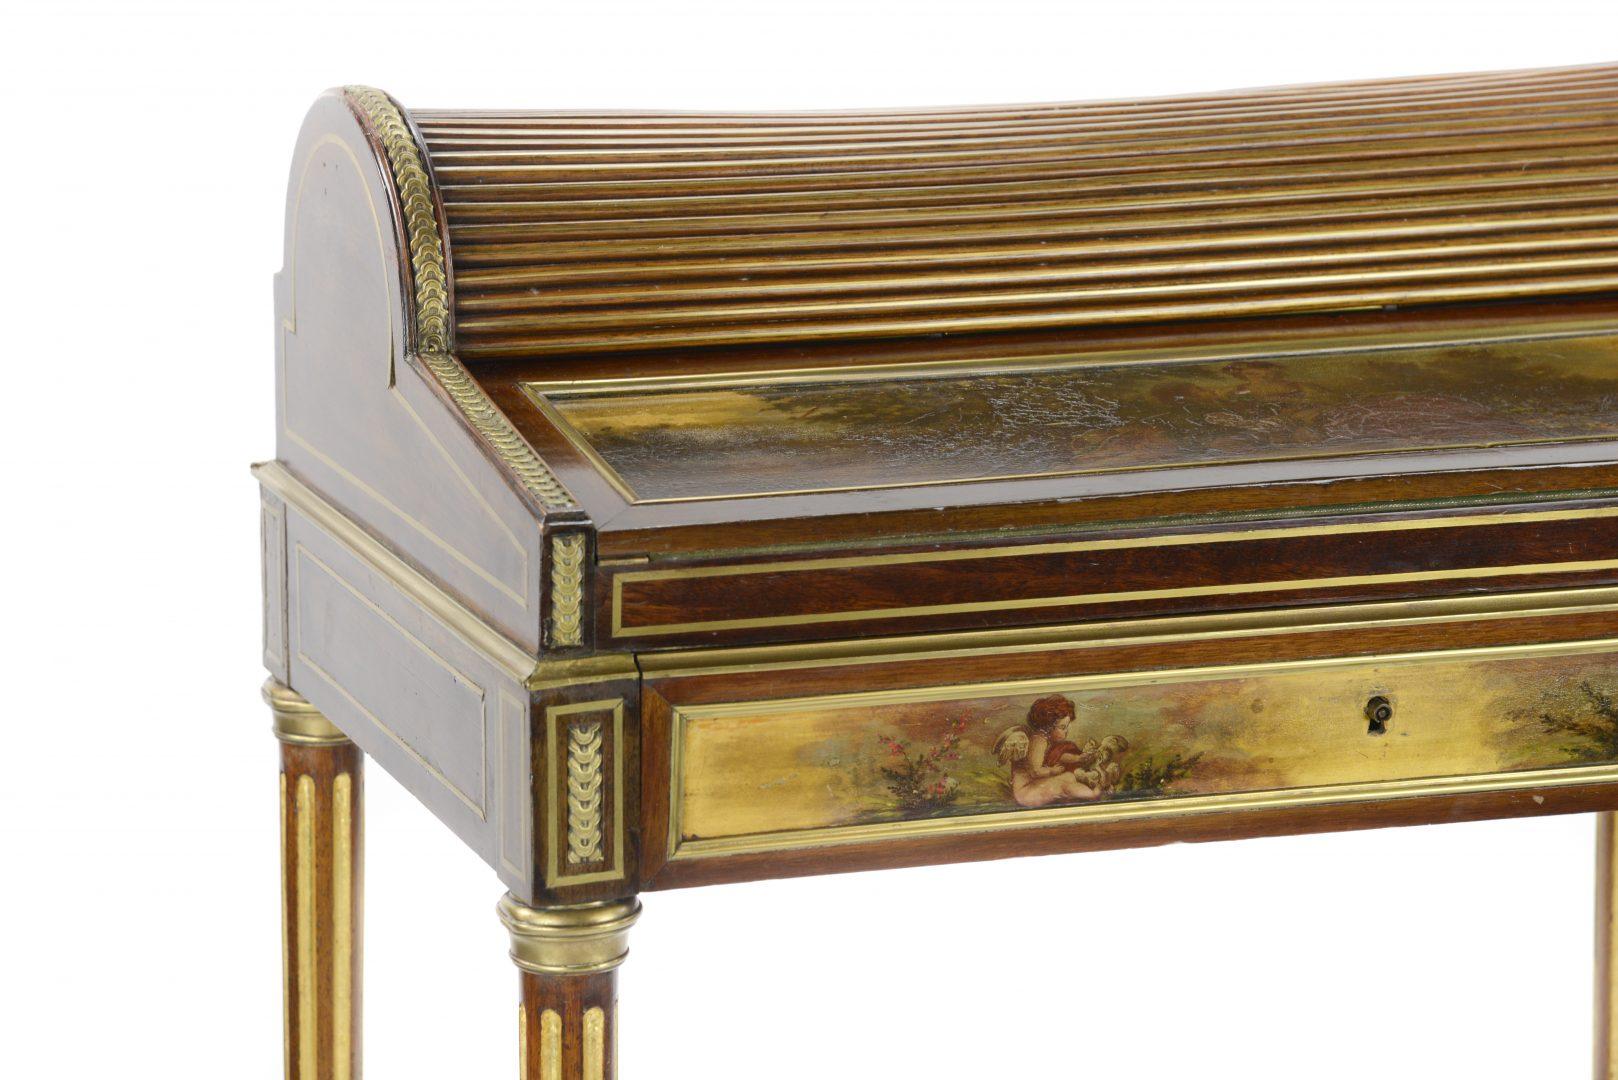 Louis XVI/transitional style mahogany gilt metal mounted Bureau en Pente, with painted scenes of figures in countryside.


Louis XVI furniture is characterized by elegance and neoclassicism, a return to ancient Greek and Roman models. Much of it